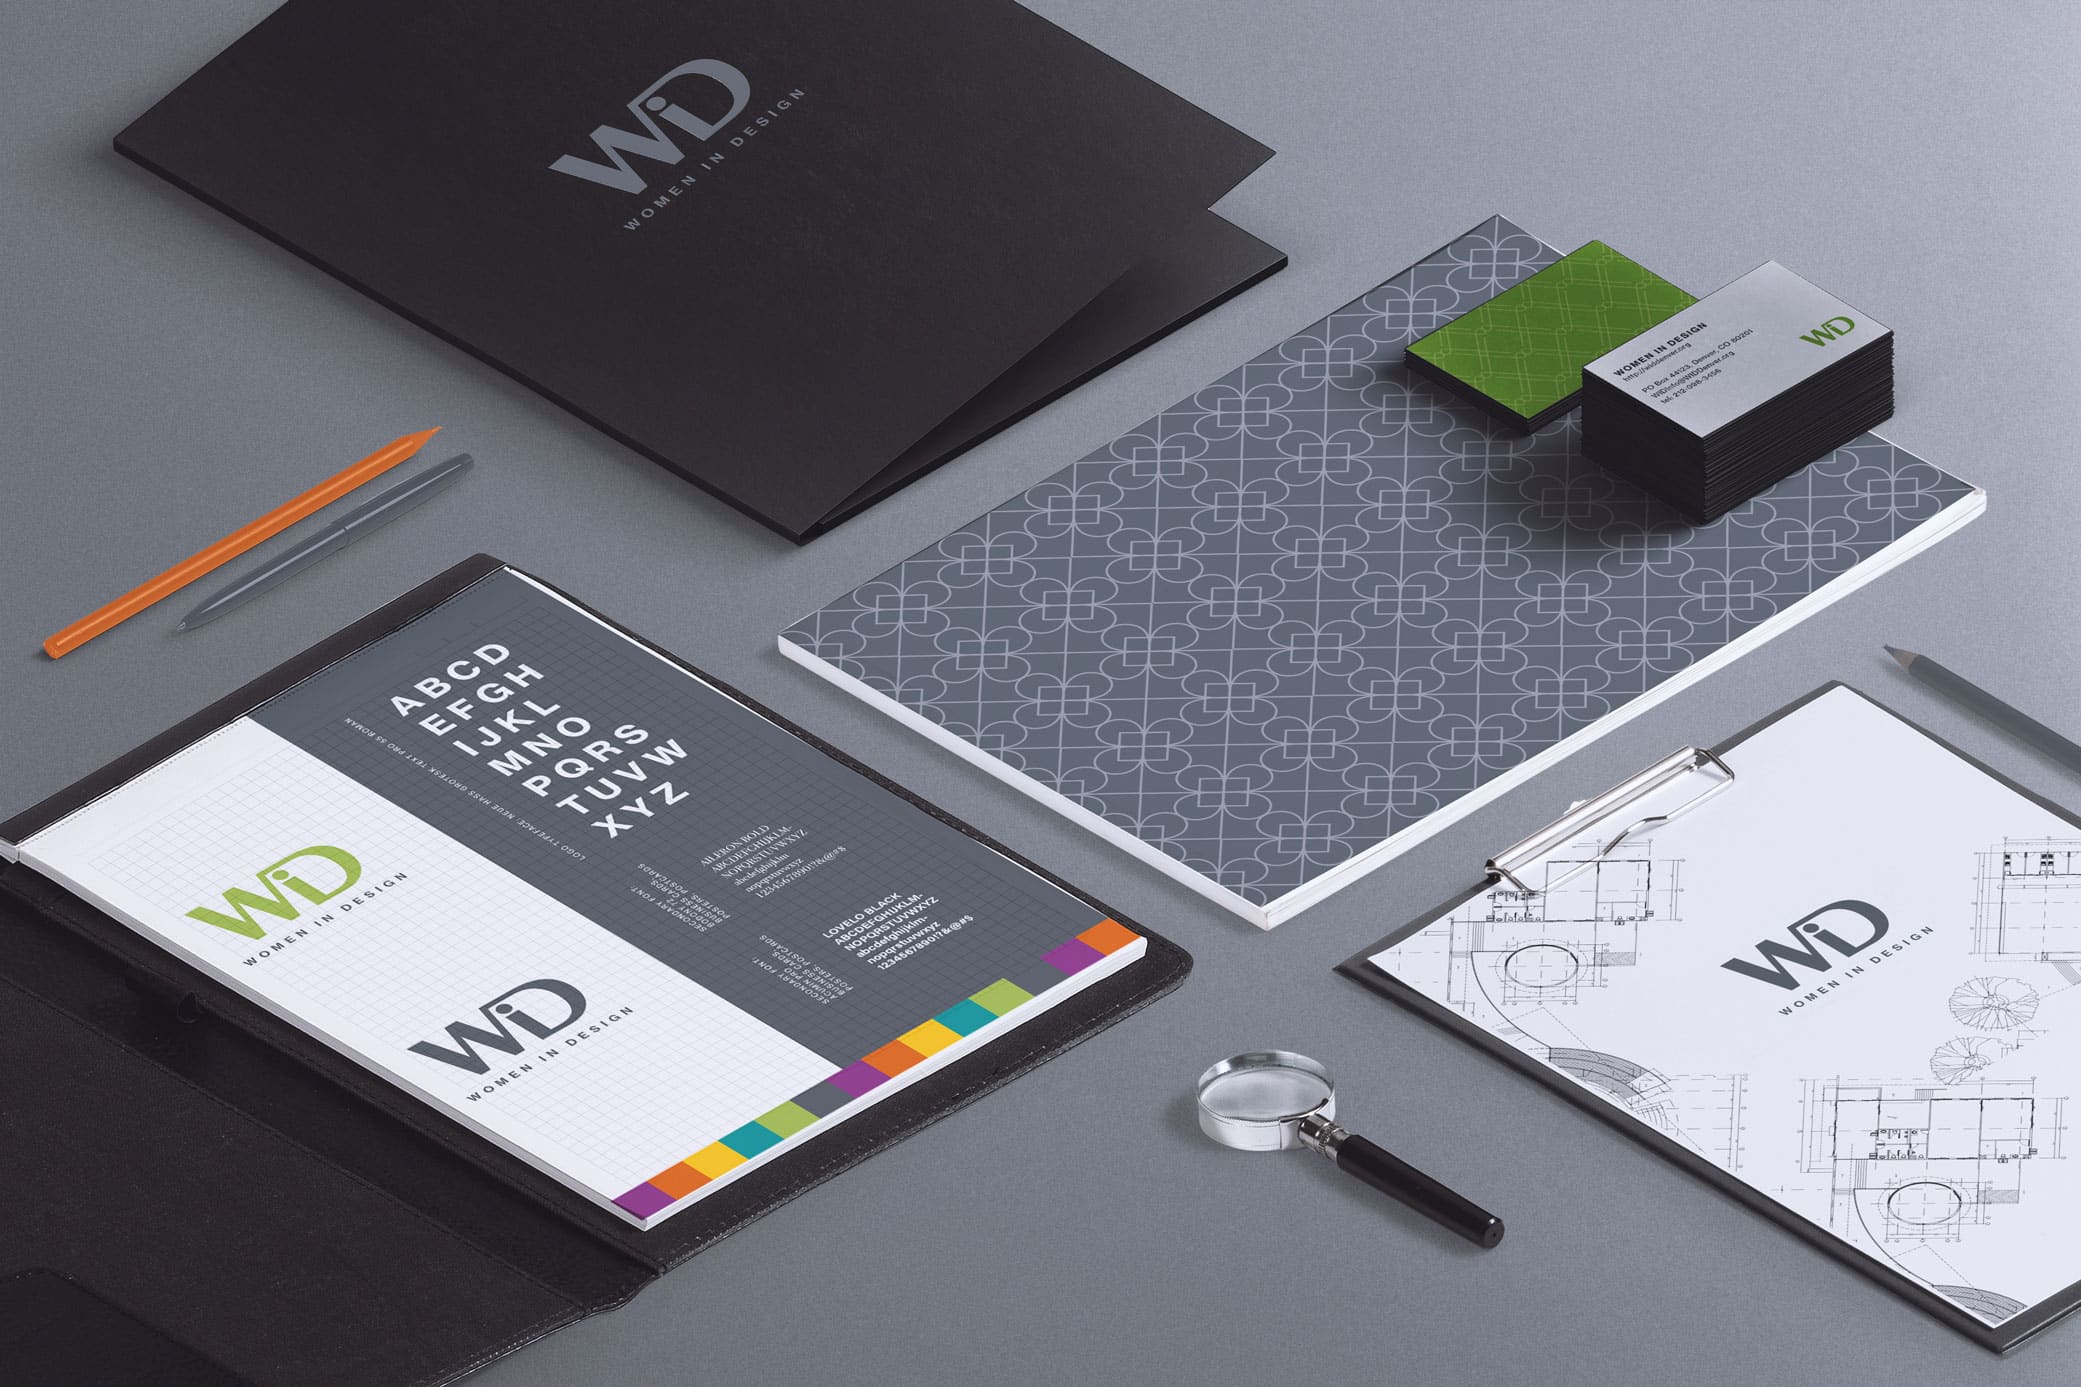 Women in Design stationary set showcasing business cards, folders, clipboard and other office utensils.